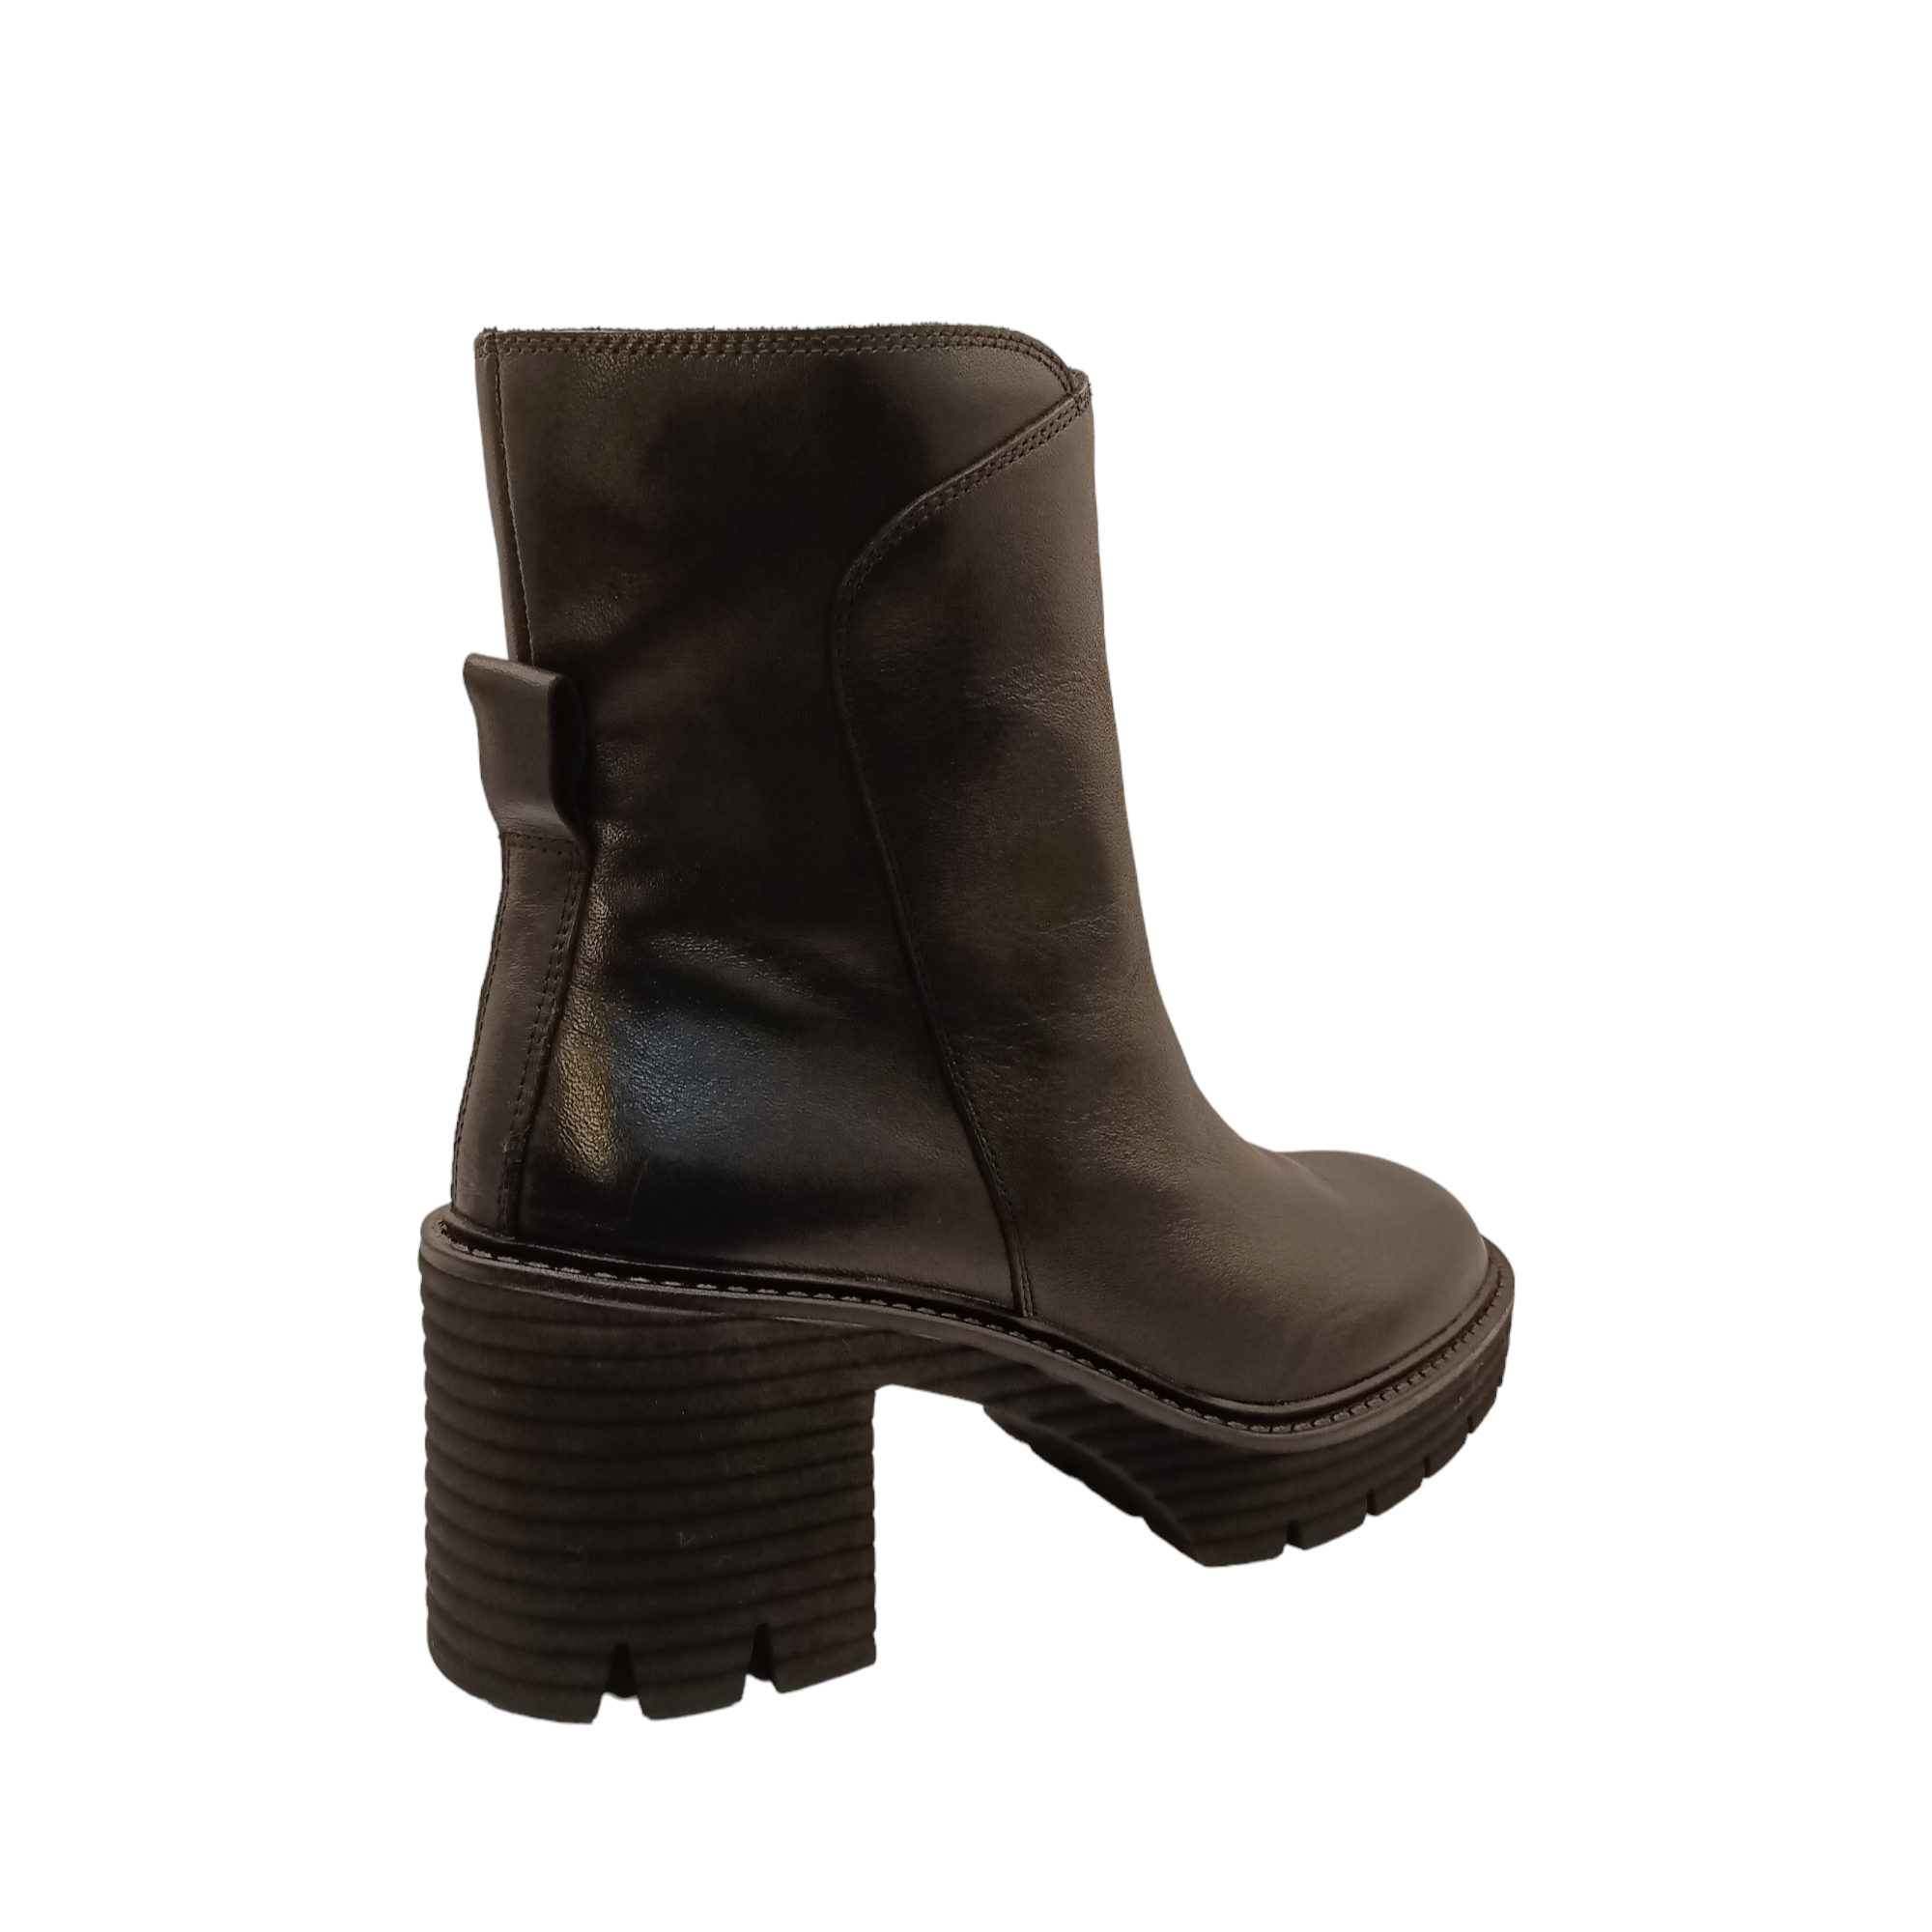 Shop Malini EOS - with shoe&me - from EOS - Boots - Boot, Winter, Womens - [collection]